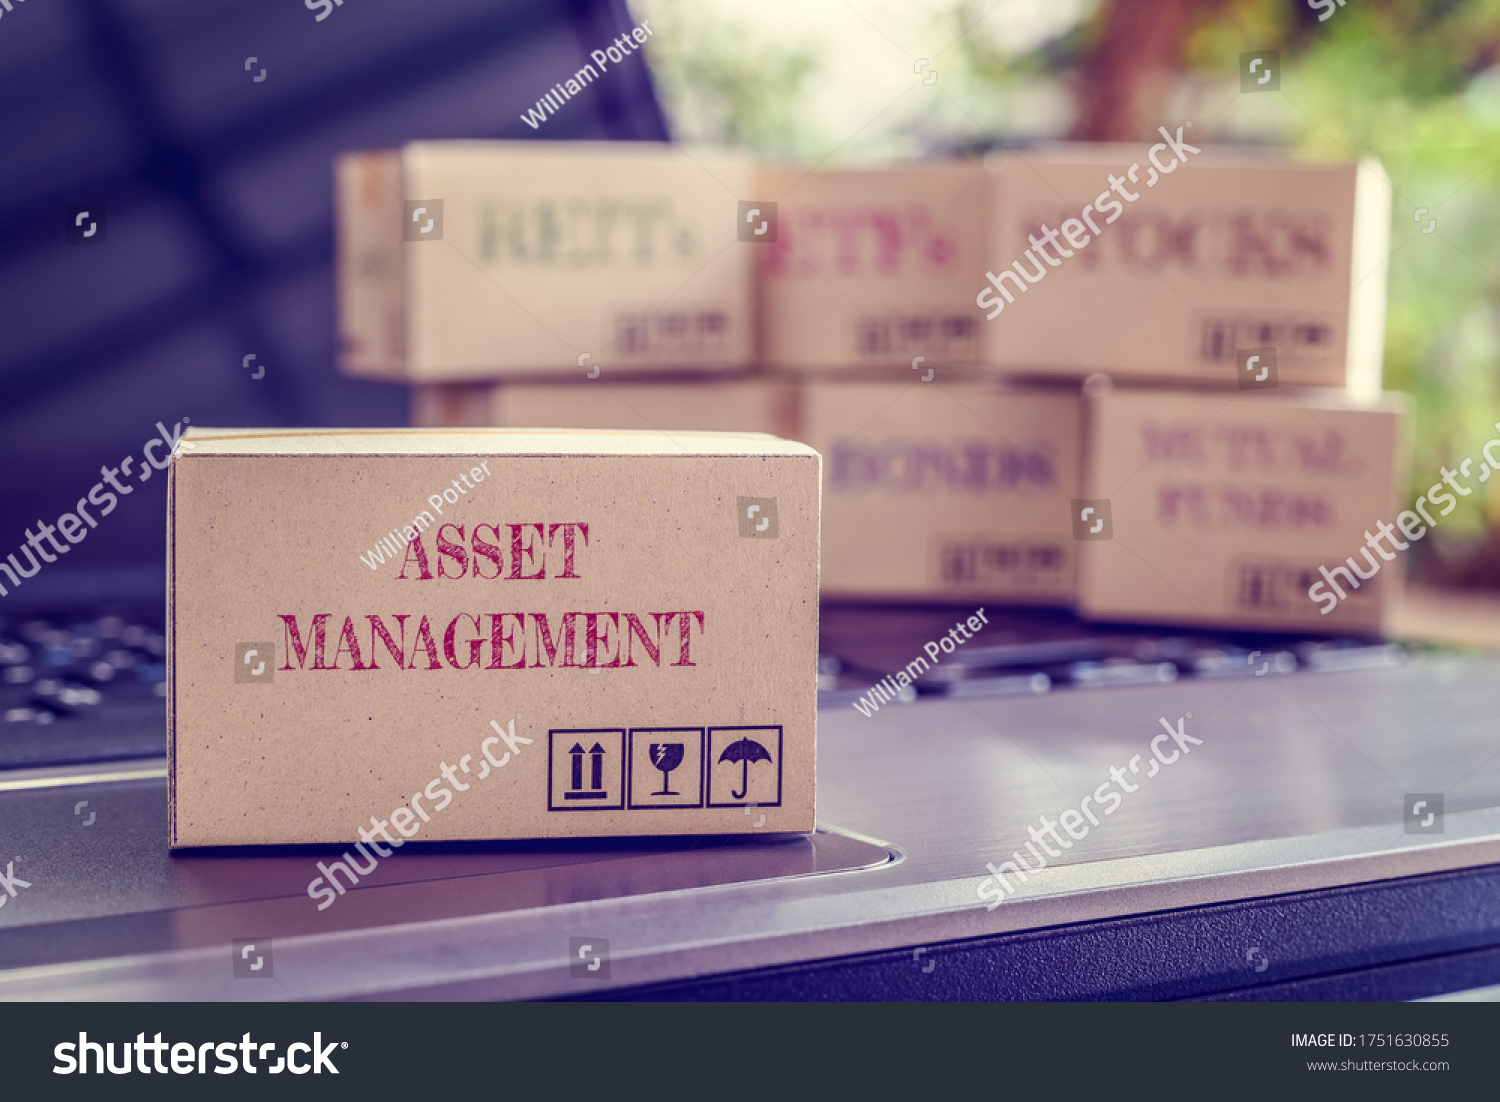 Online asset management / portfolio risk diversification for long-term sustainable growth concept : Boxes of financial products e.g bonds, commodities, stocks, mutual funds, ETFs, REITs on a laptop #1751630855